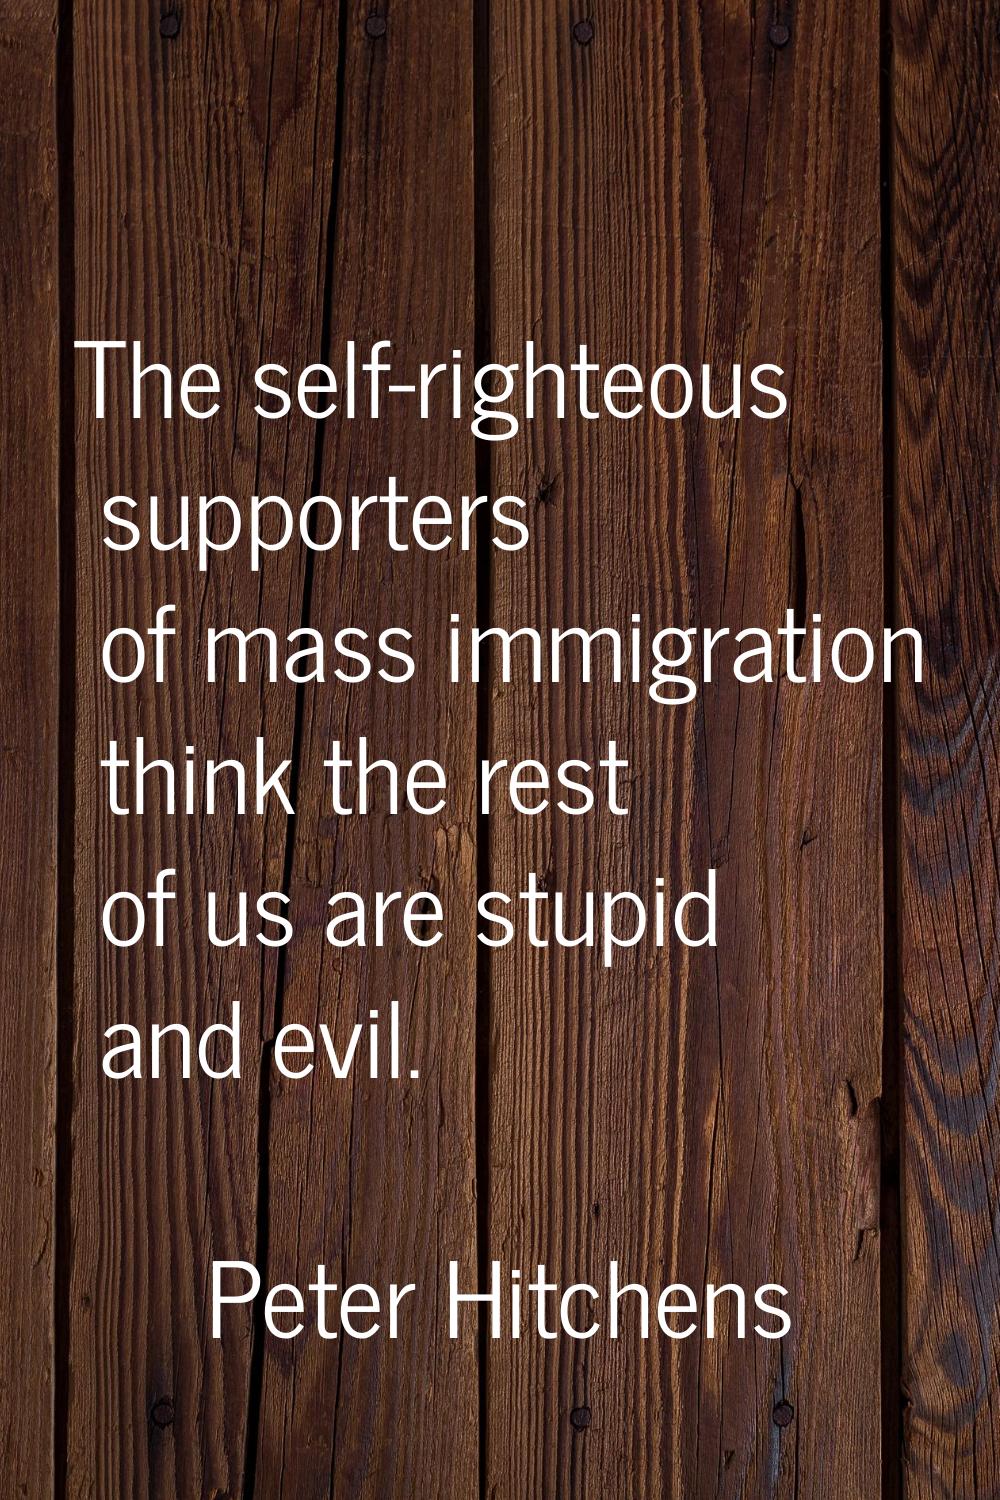 The self-righteous supporters of mass immigration think the rest of us are stupid and evil.